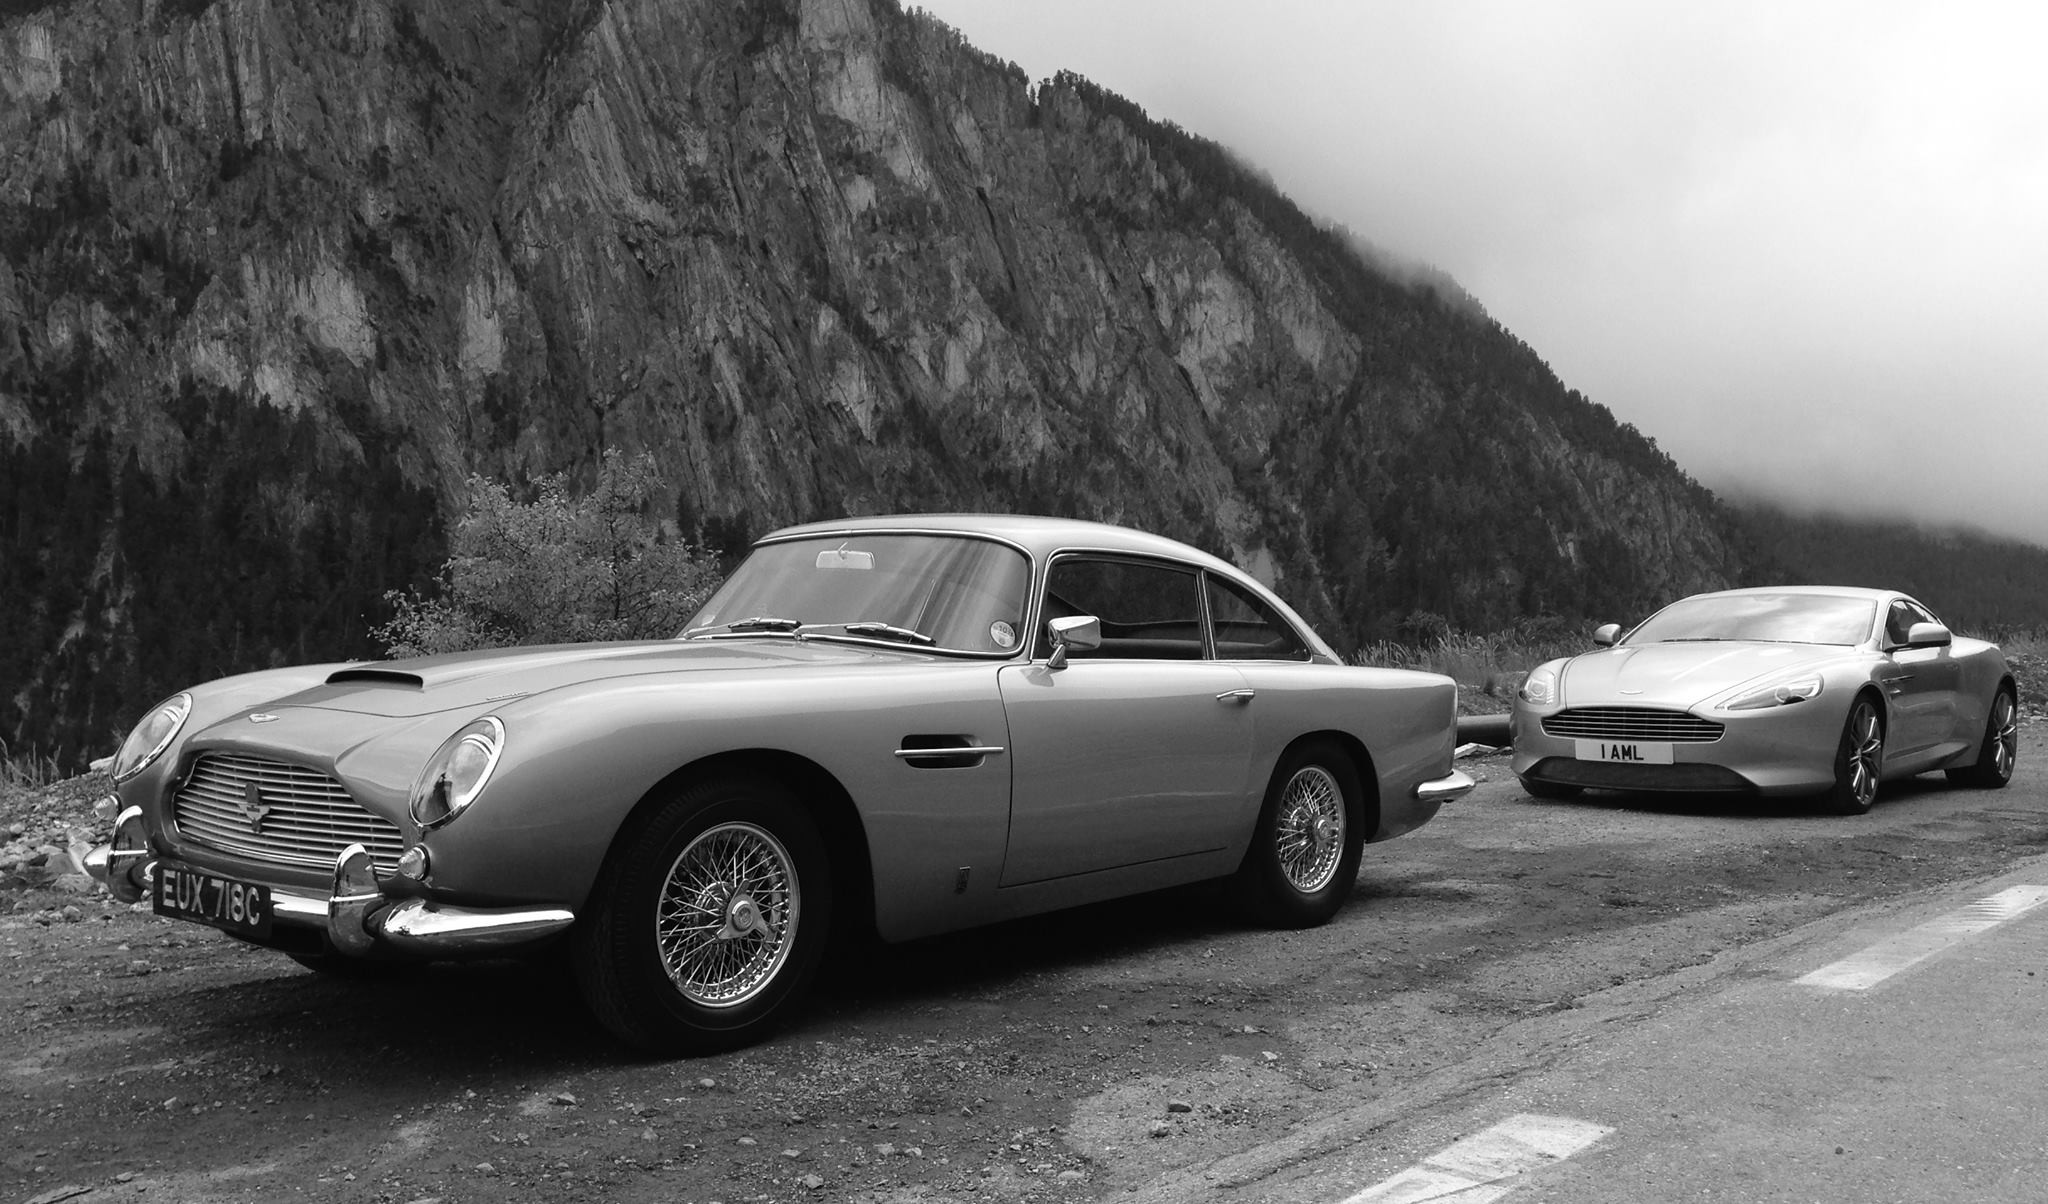 General 2048x1204 vehicle car old car classic car Aston Martin Aston Martin DB5 Aston Martin DB9 road monochrome mist mountains trees British cars